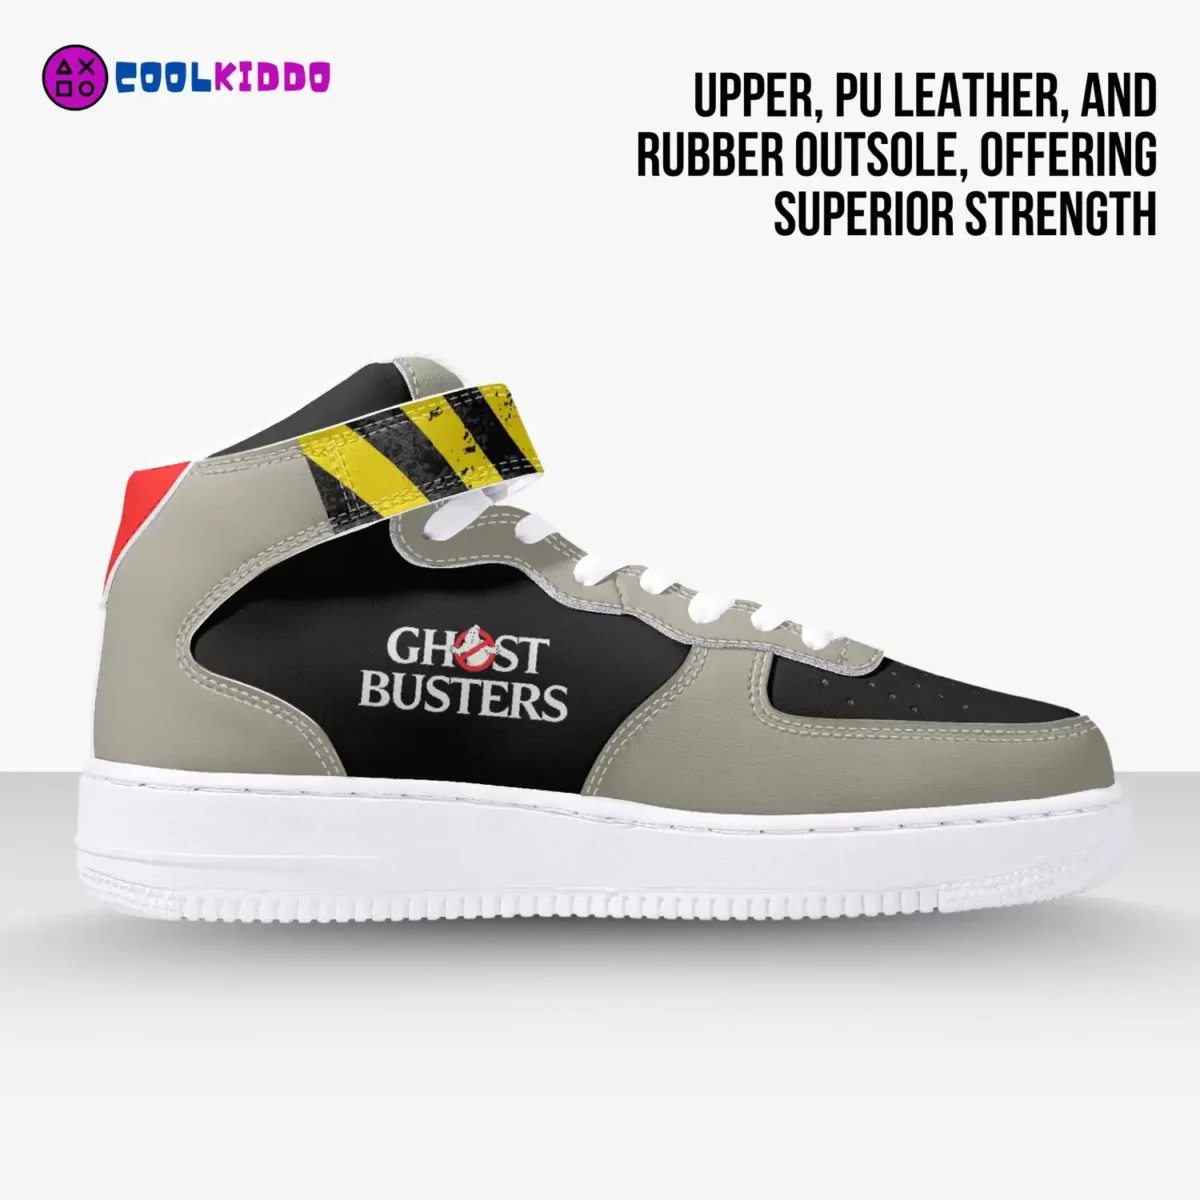 Custom GHOSTBUSTERS Air Force One Style High-Top Leather Sneakers – Casual Shoes for Youth/Adults Cool Kiddo 14